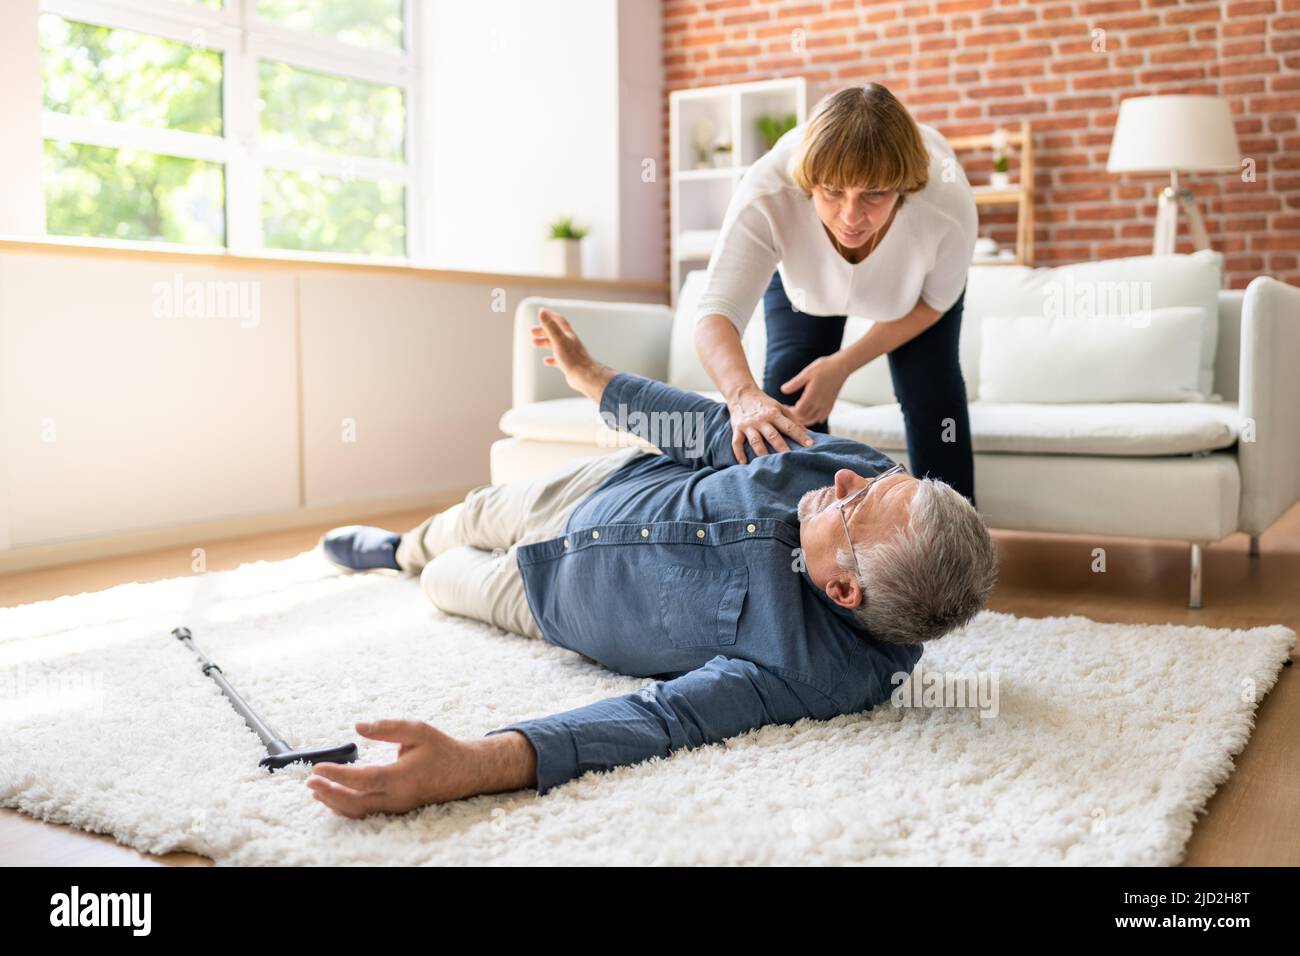 Slip And Fall Risk. Helping  Woman Stock Photo